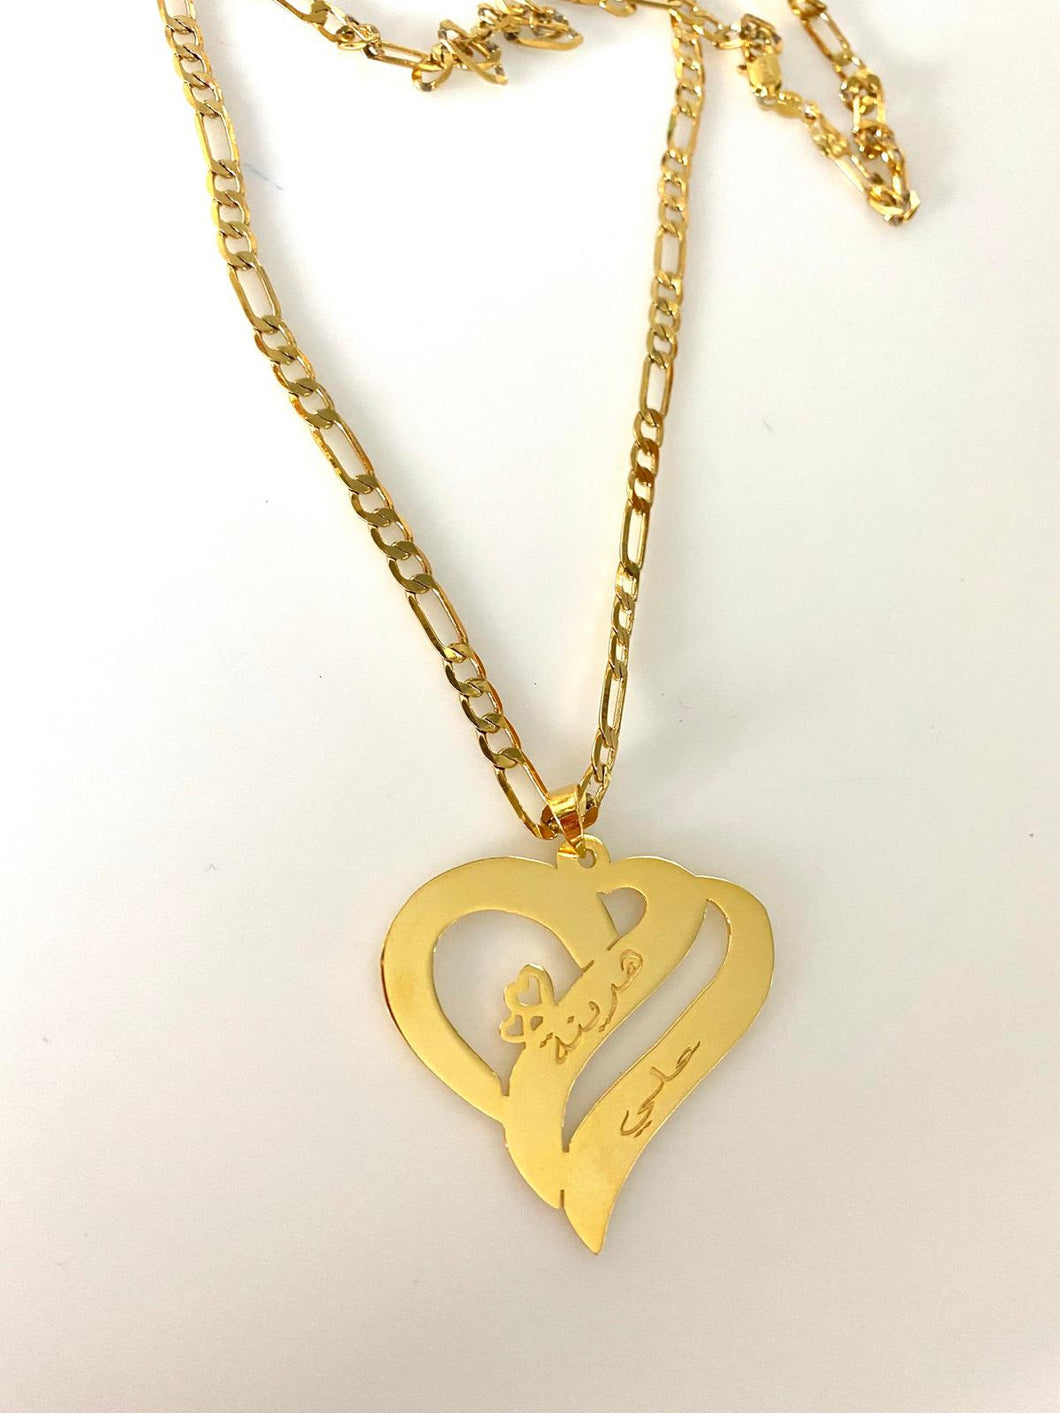 2 name necklace - couples combined mini hearts